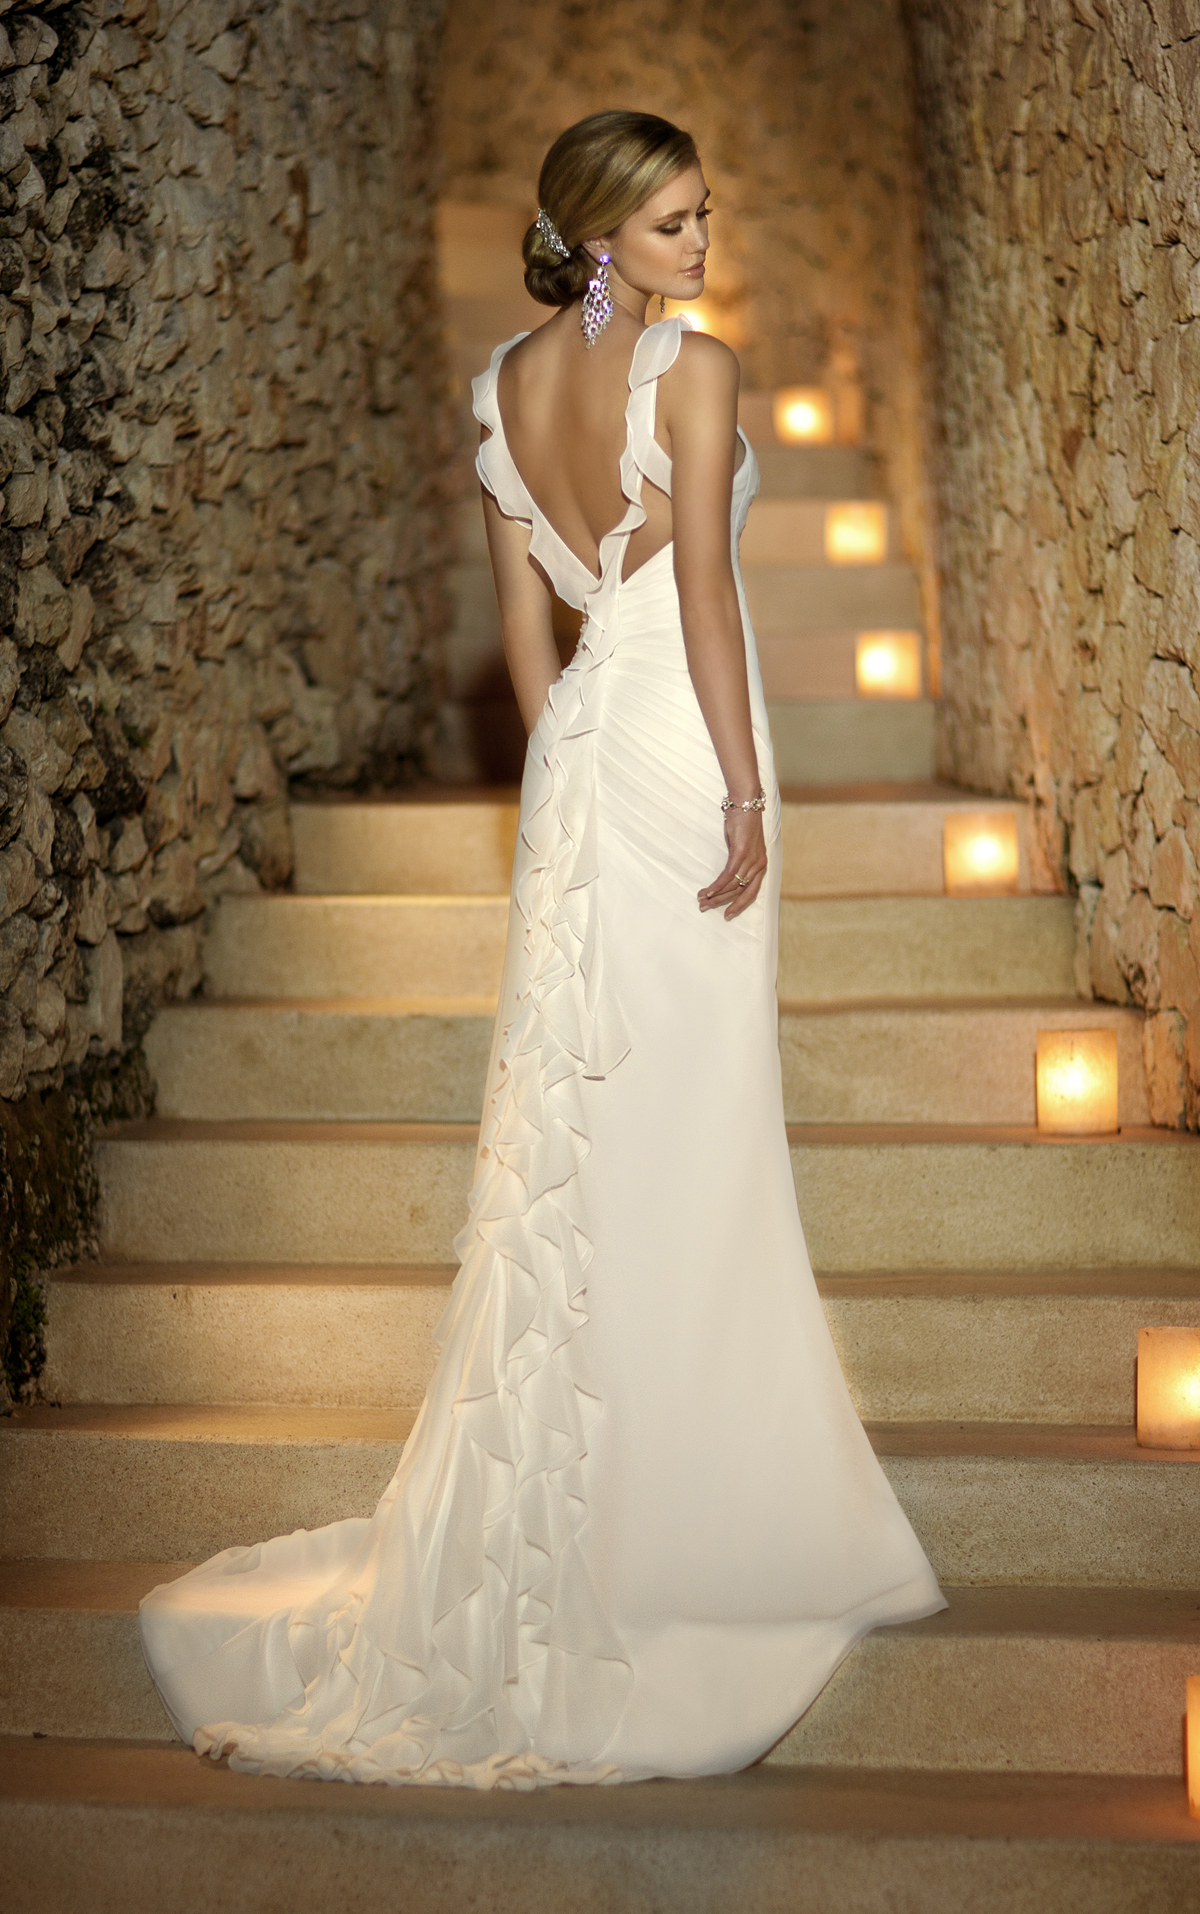 Top Wedding Dresses In West Palm Beach of all time The ultimate guide 